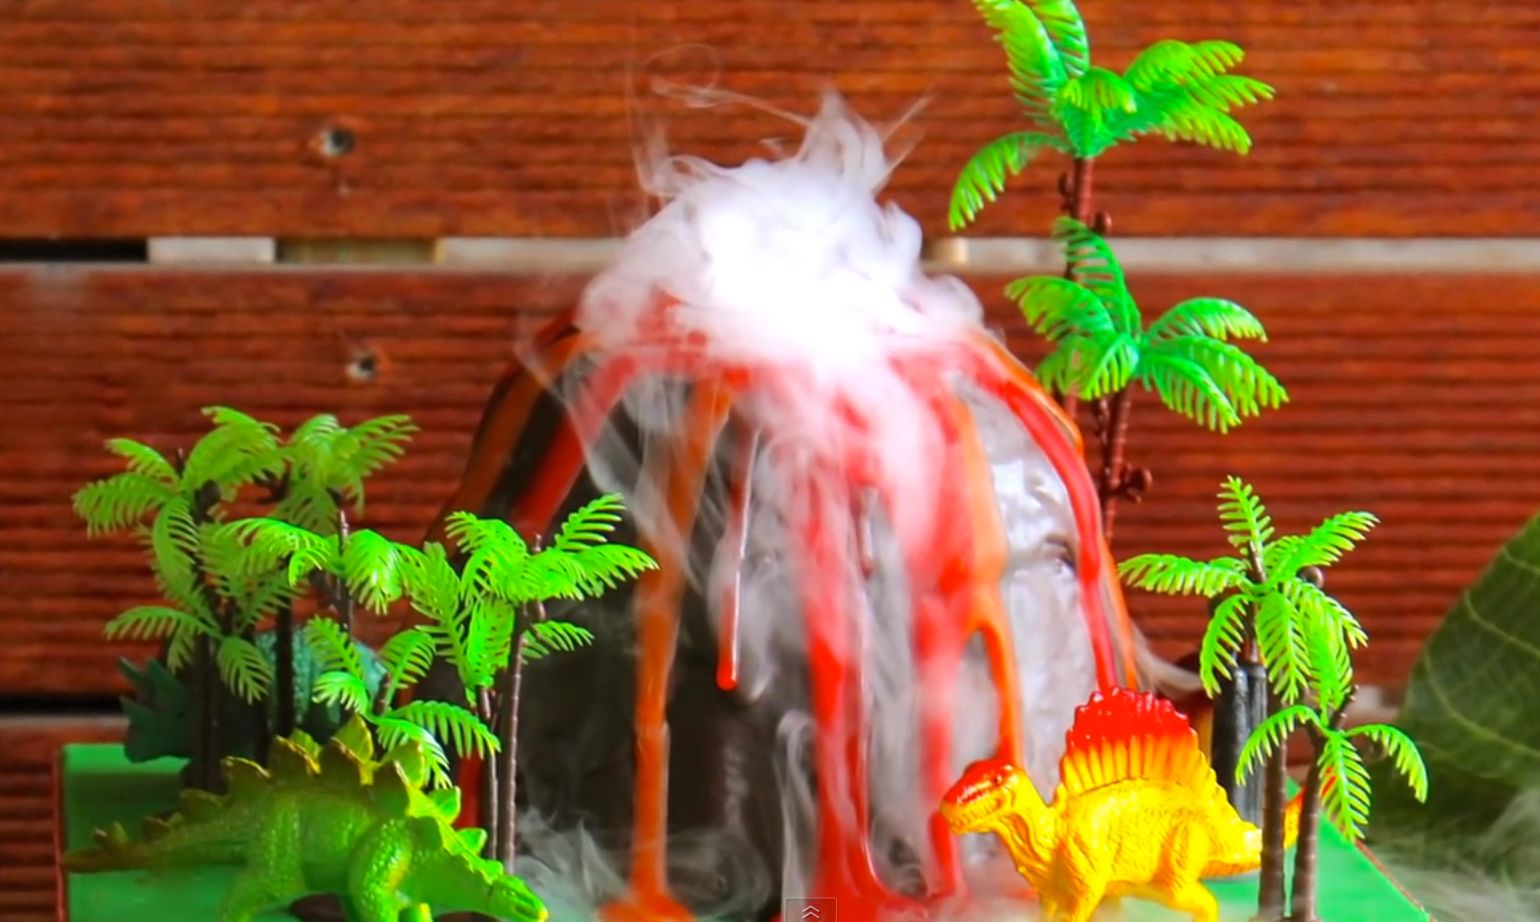 YouTube cooking shows for kids: Smoking Volcano Cake at My Cupcake Addiction